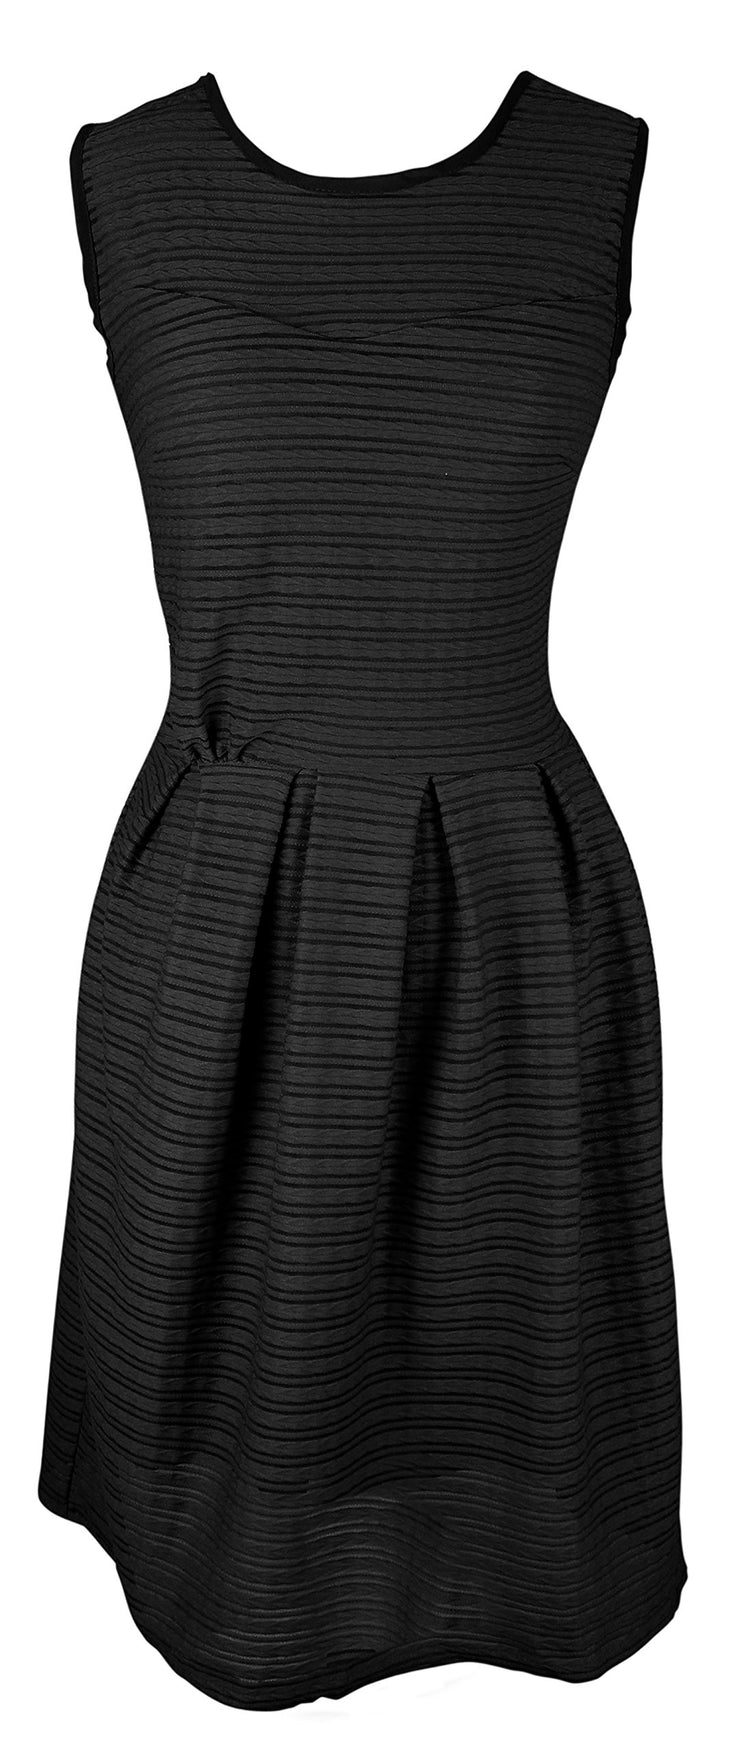 Womens Solid Color Chic Sleeveless Ribbed Skater Dress